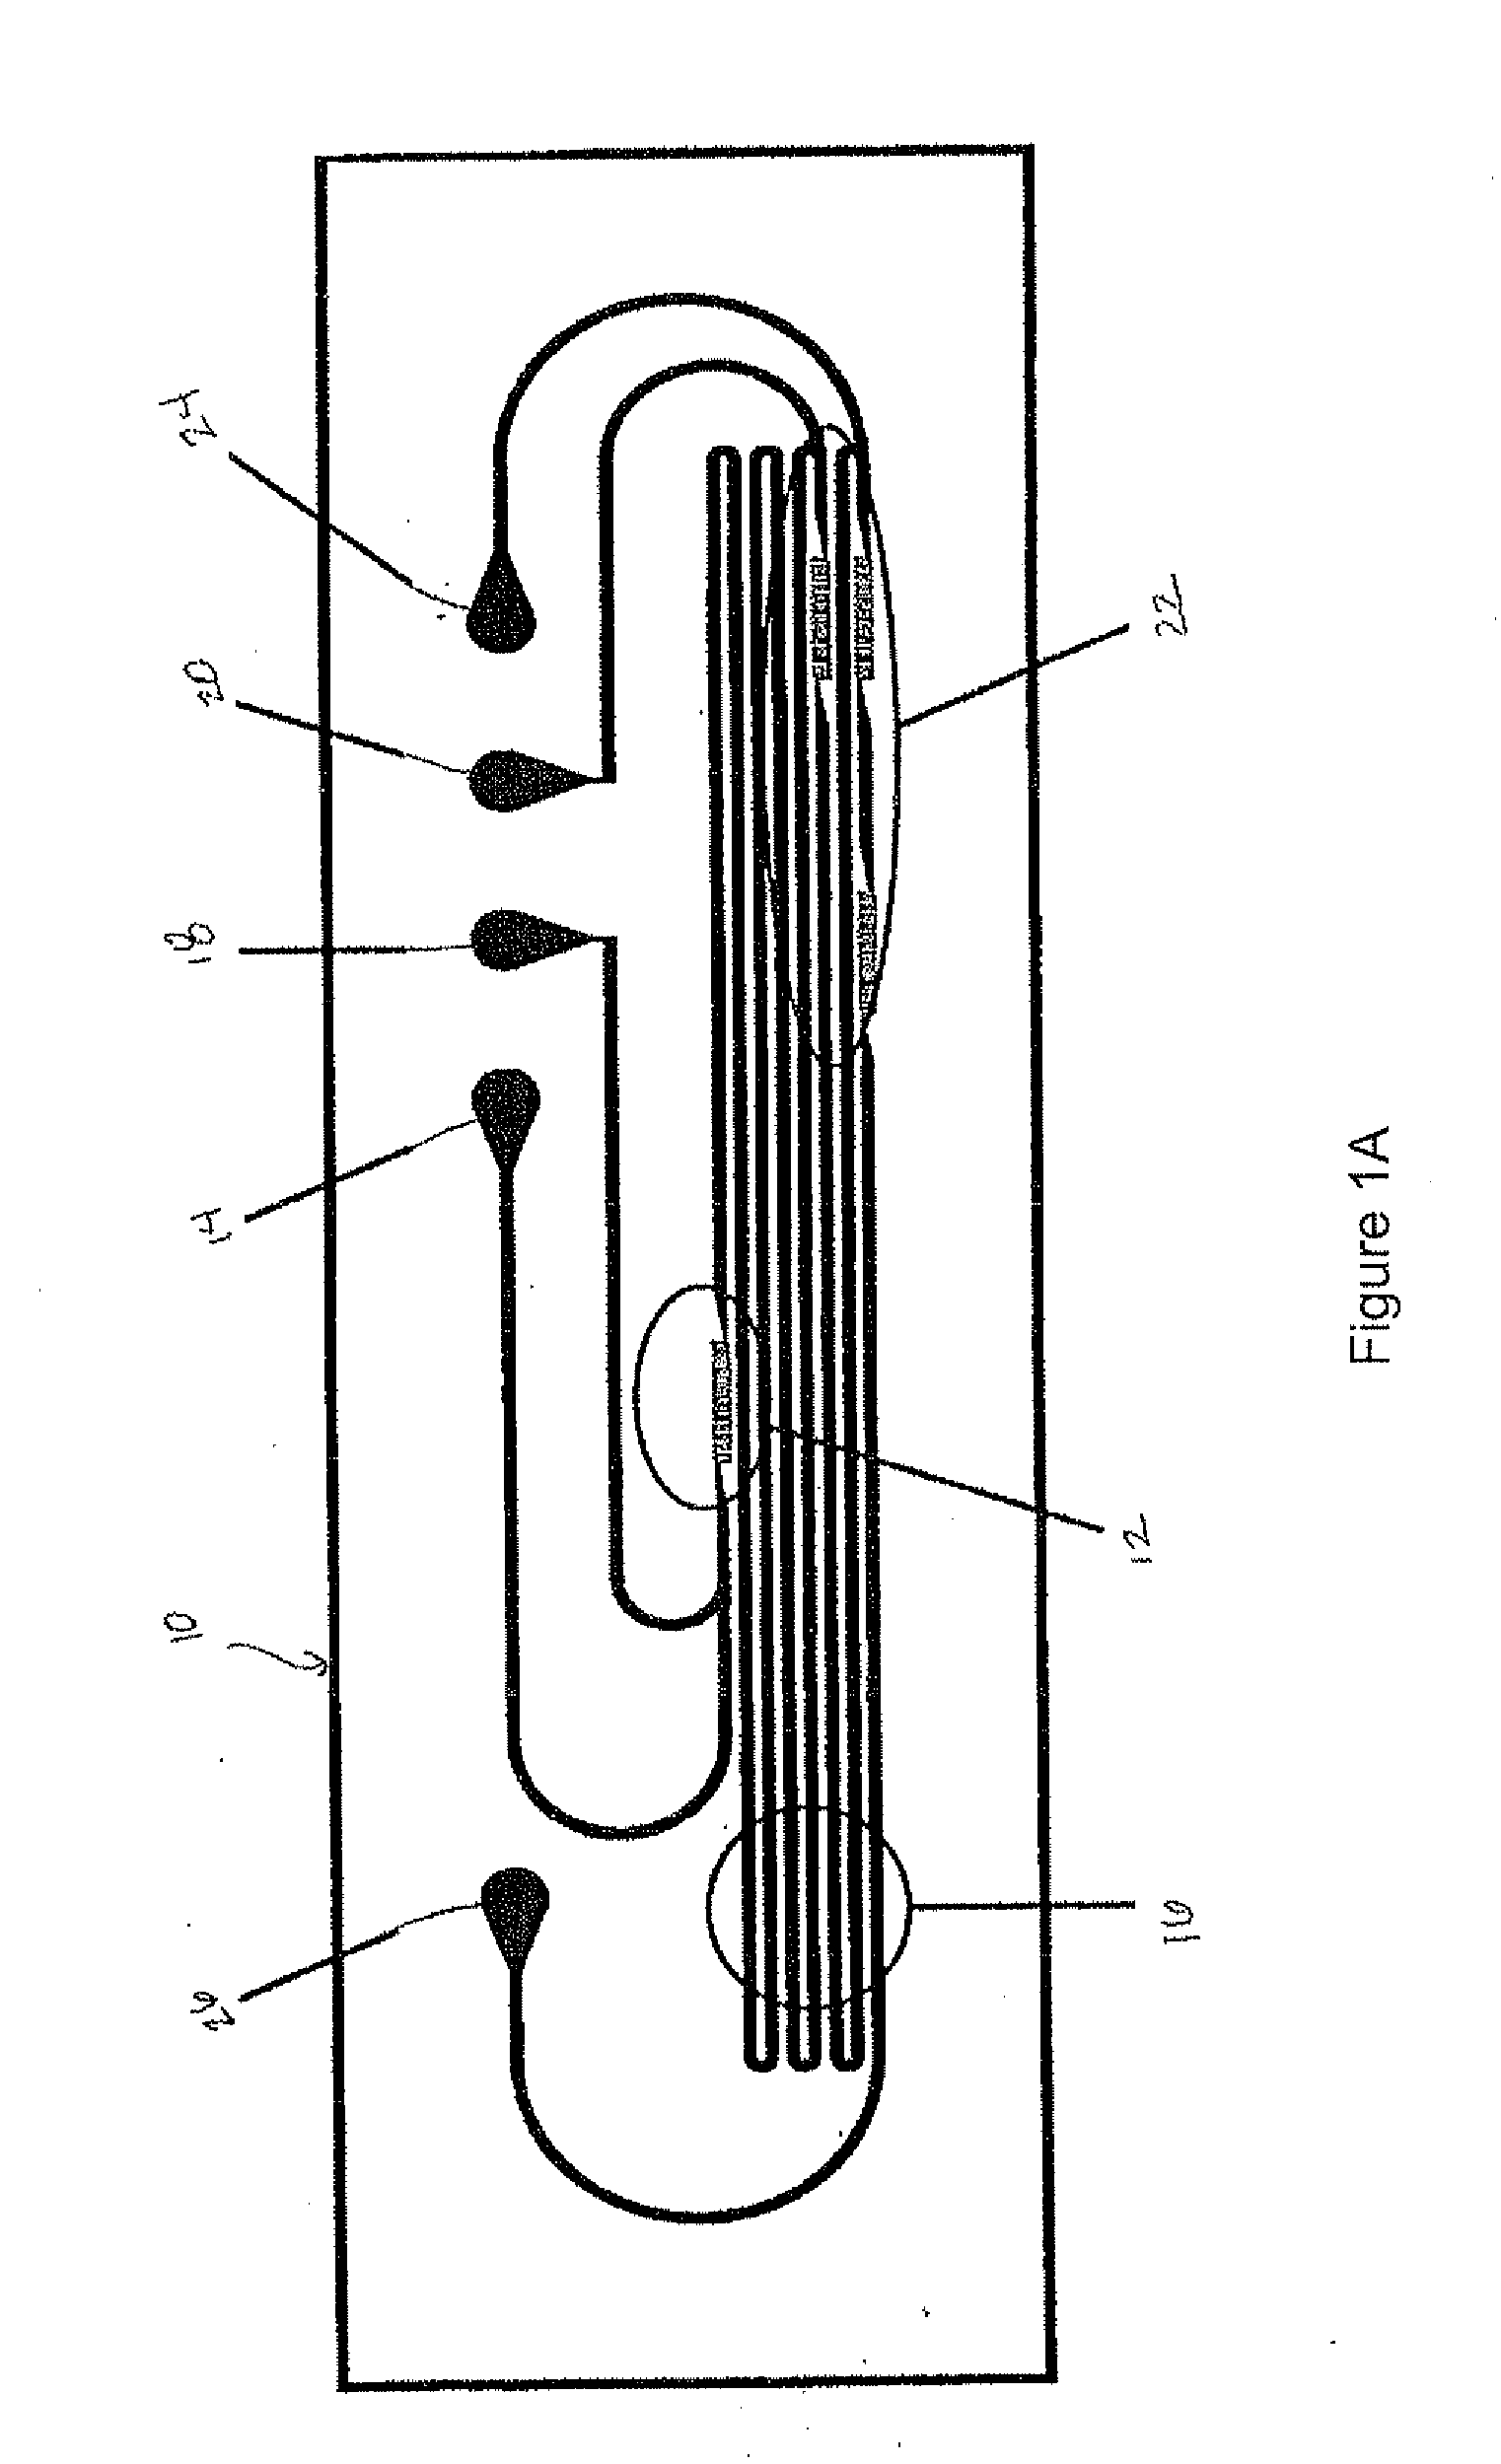 Microchemical method and apparatus for synthesis and coating of colloidal nanoparticles